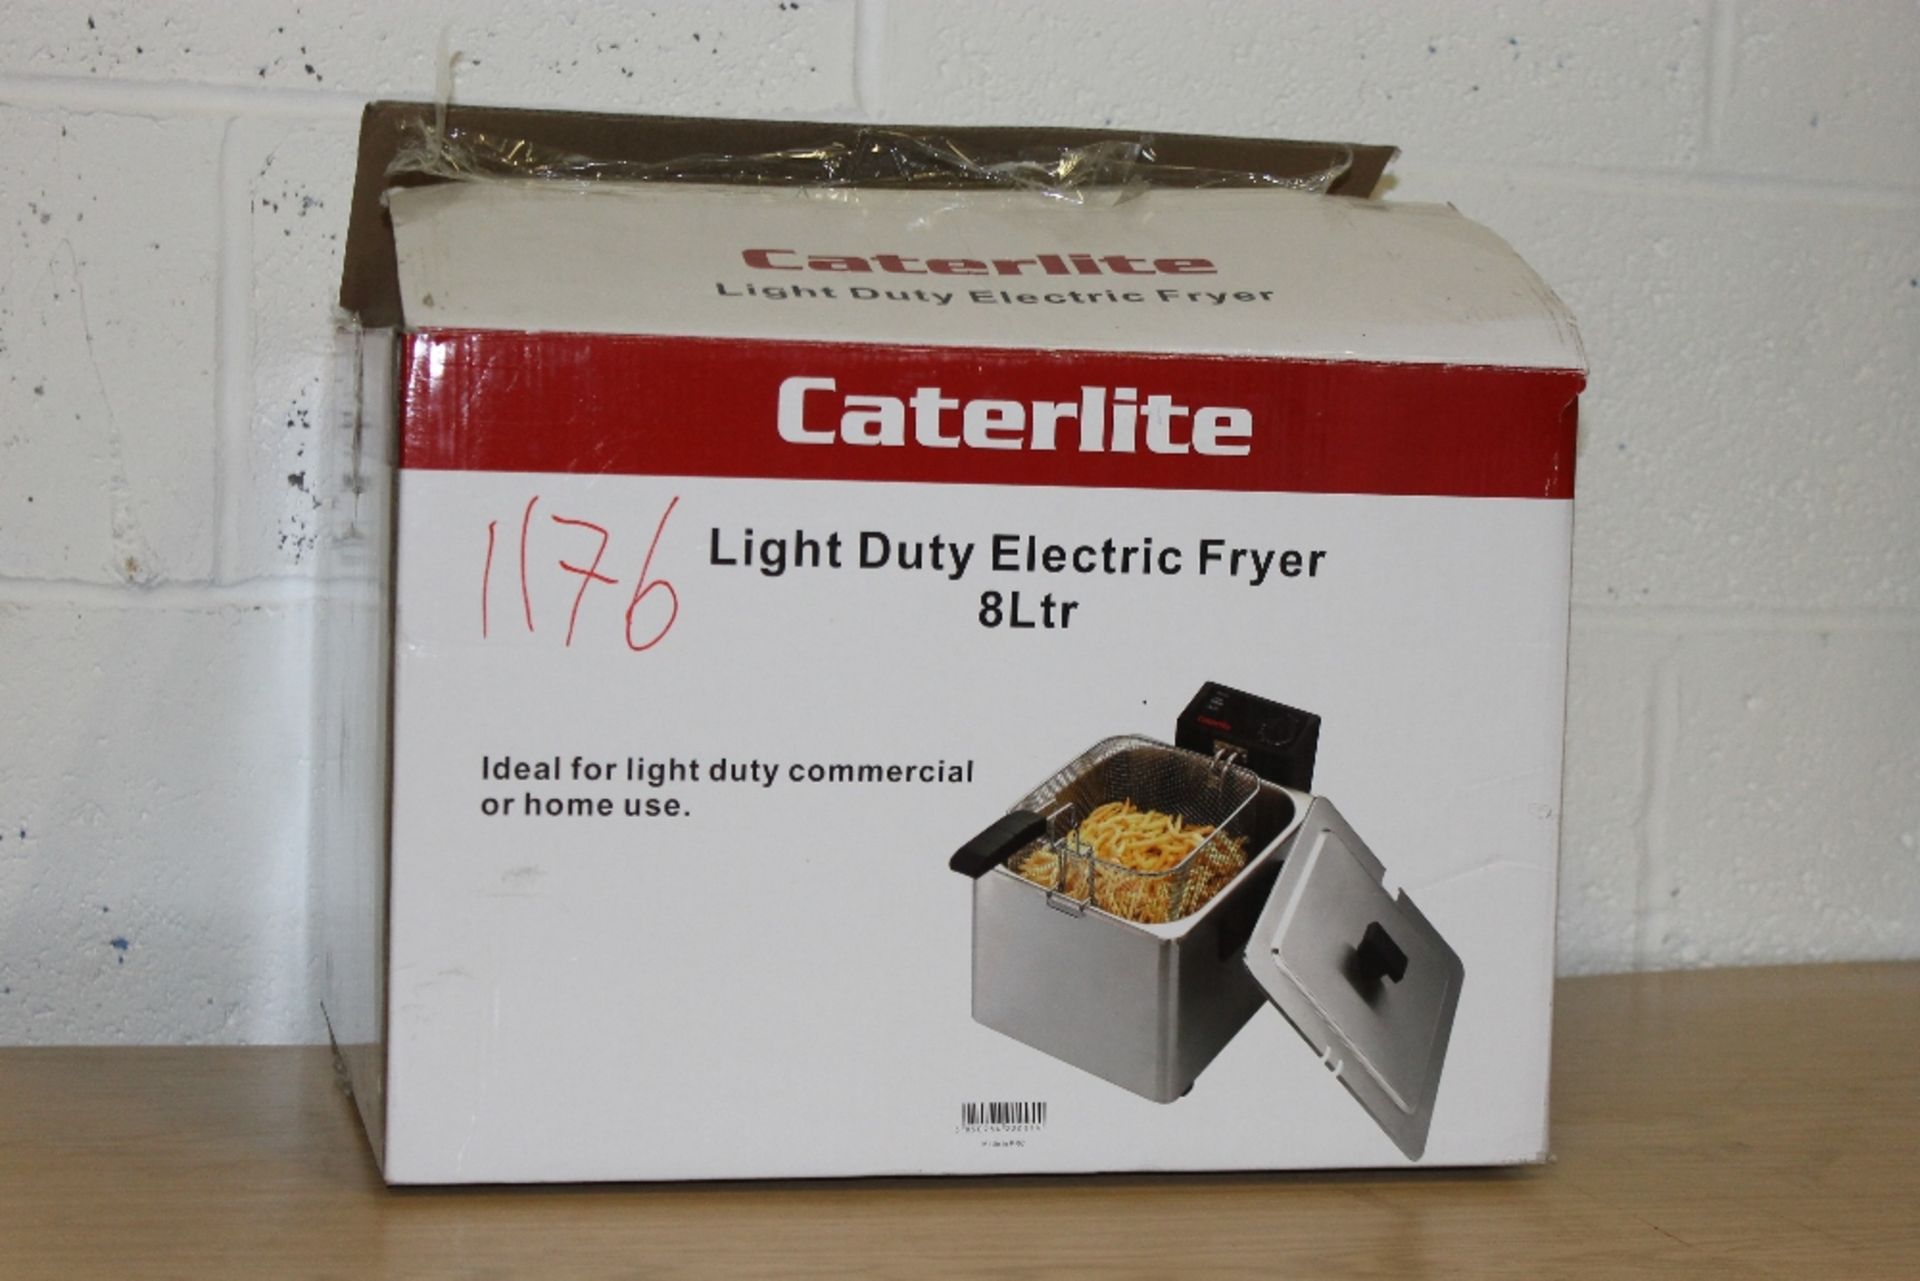 Caterlite Single Electric Fryer -1ph - Tested Working - Image 3 of 3